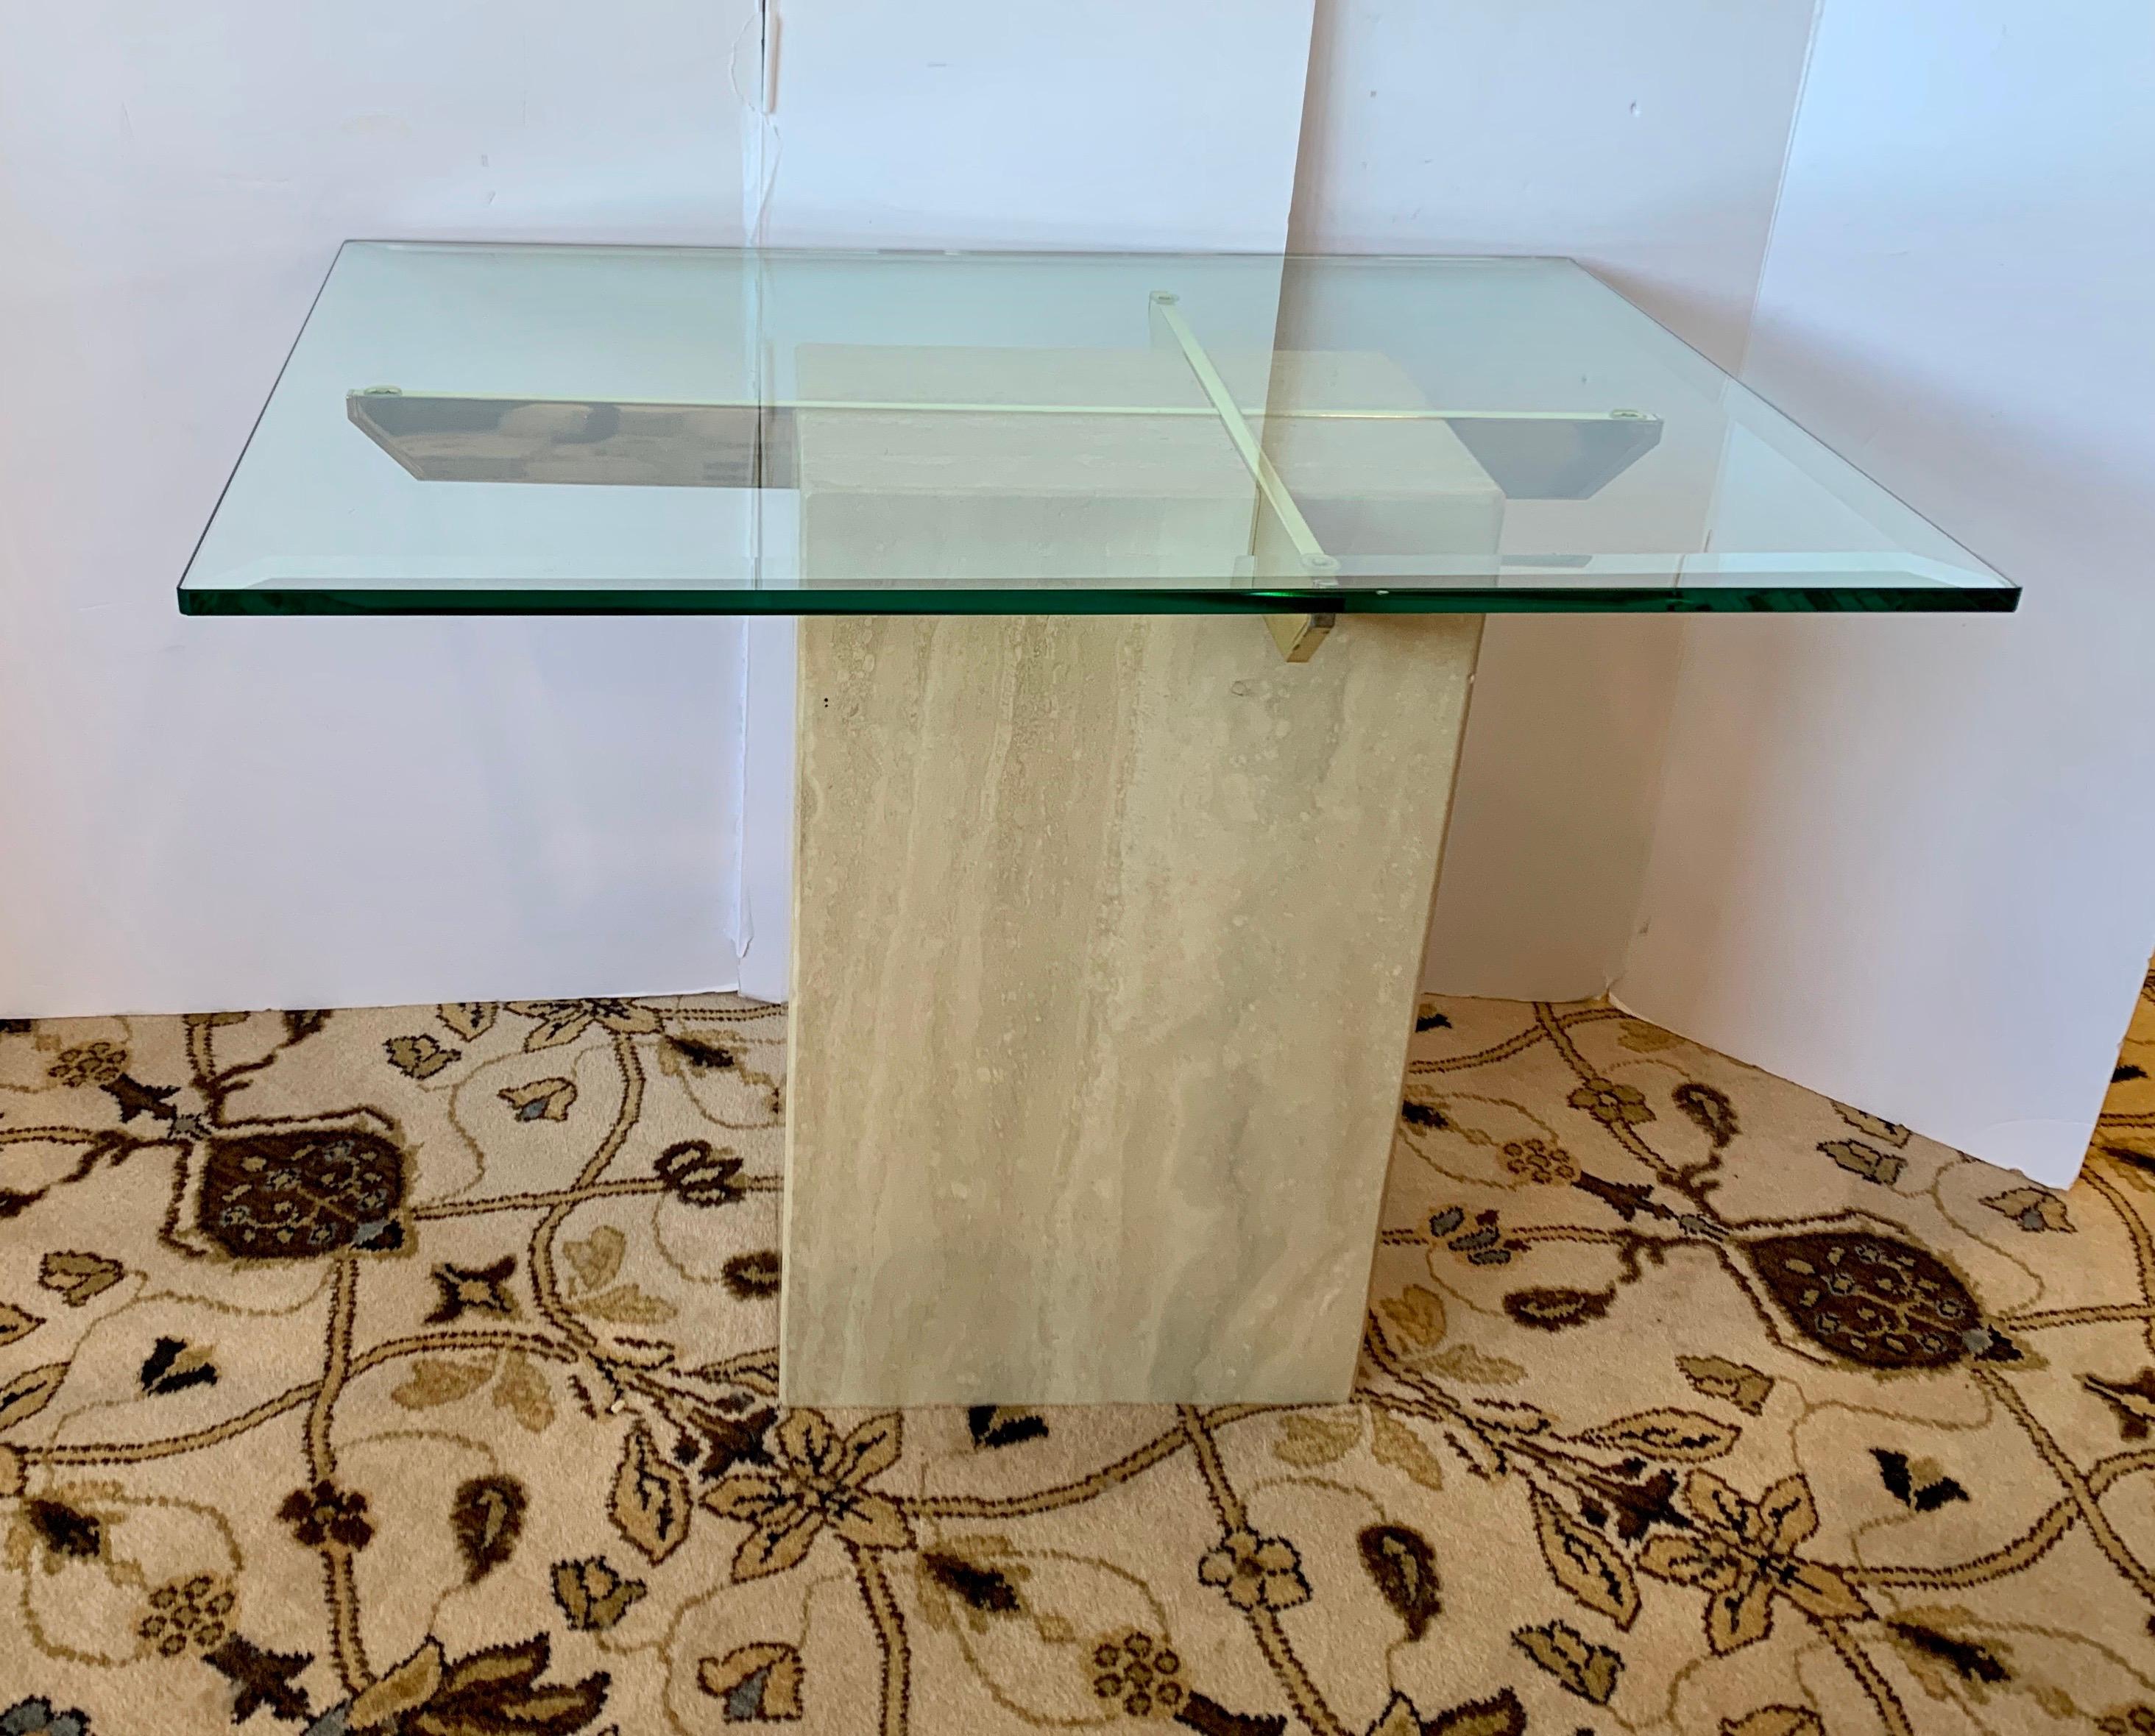 Magnificent Mid-Century Modern Artedi side table features a thick rectangular glass top with a travertine base. Sleek design with two brass supports fitted inside the travertine marble base holds the large glass tabletop. This elegant piece makes